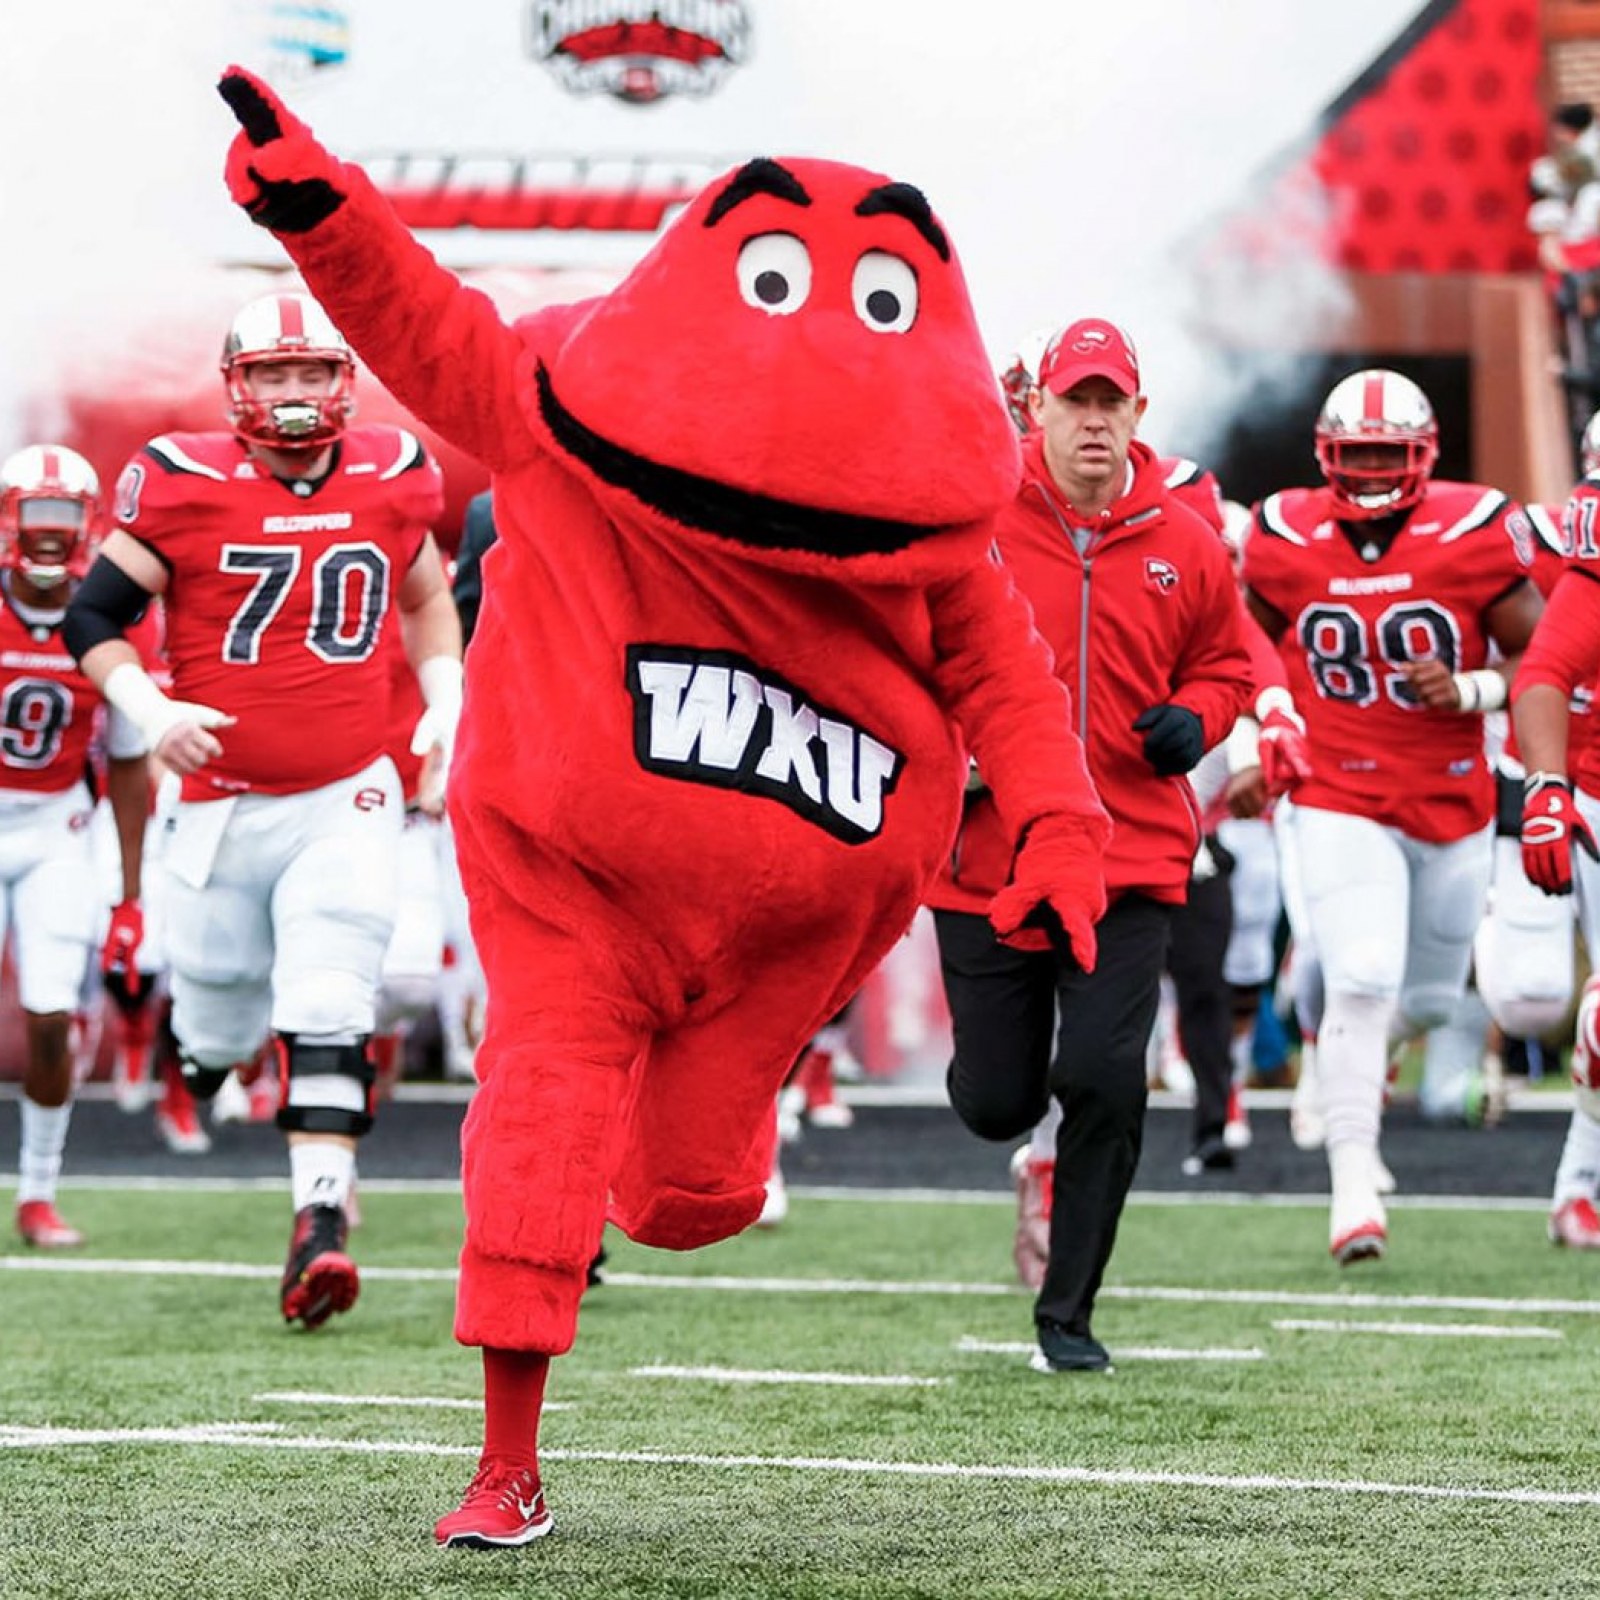 These 15 Colleges Have the Most Unique Mascots